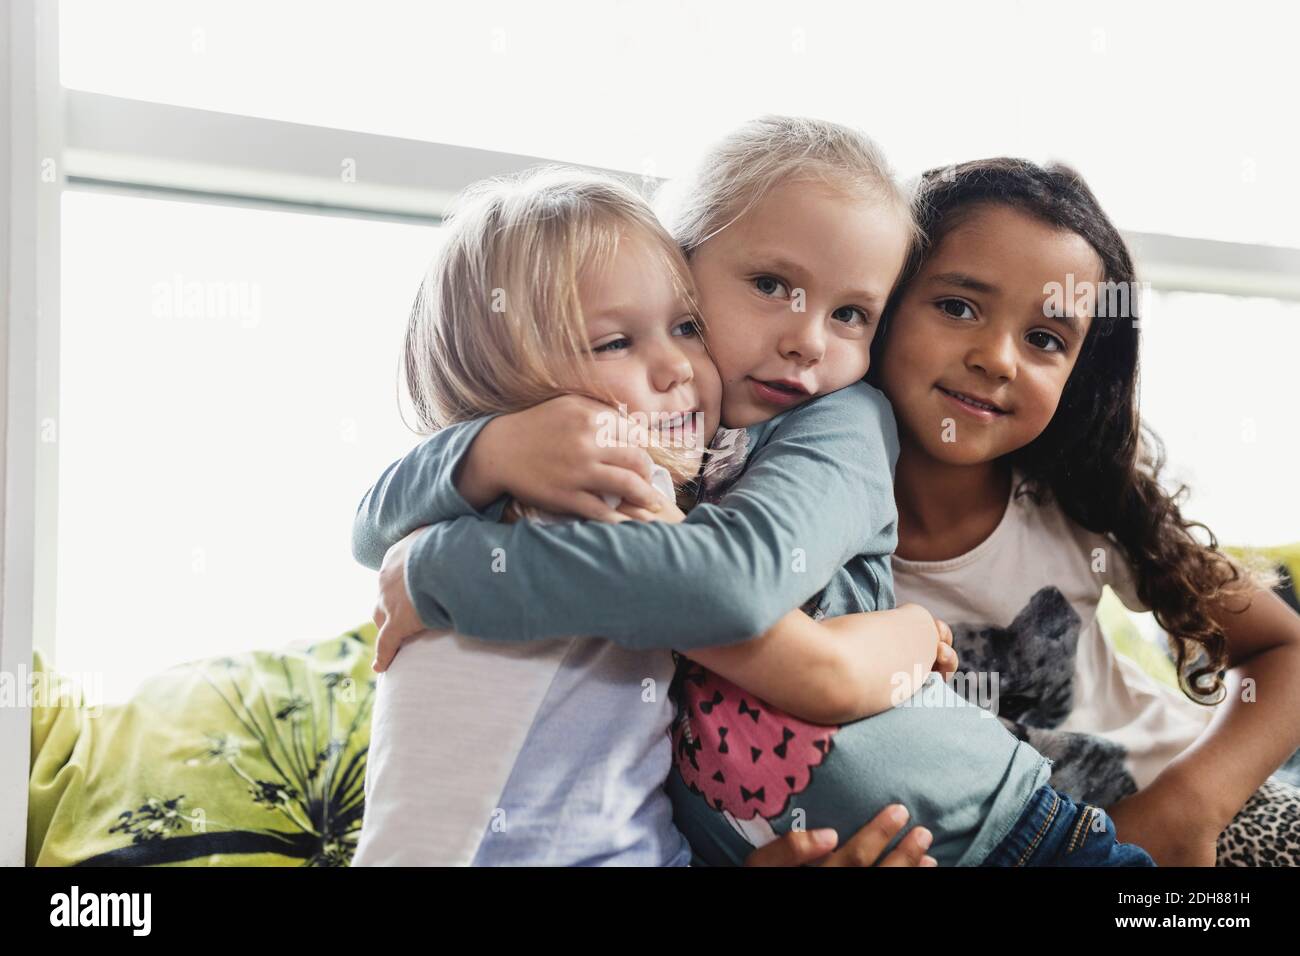 Portrait of girls embracing in day care center Stock Photo